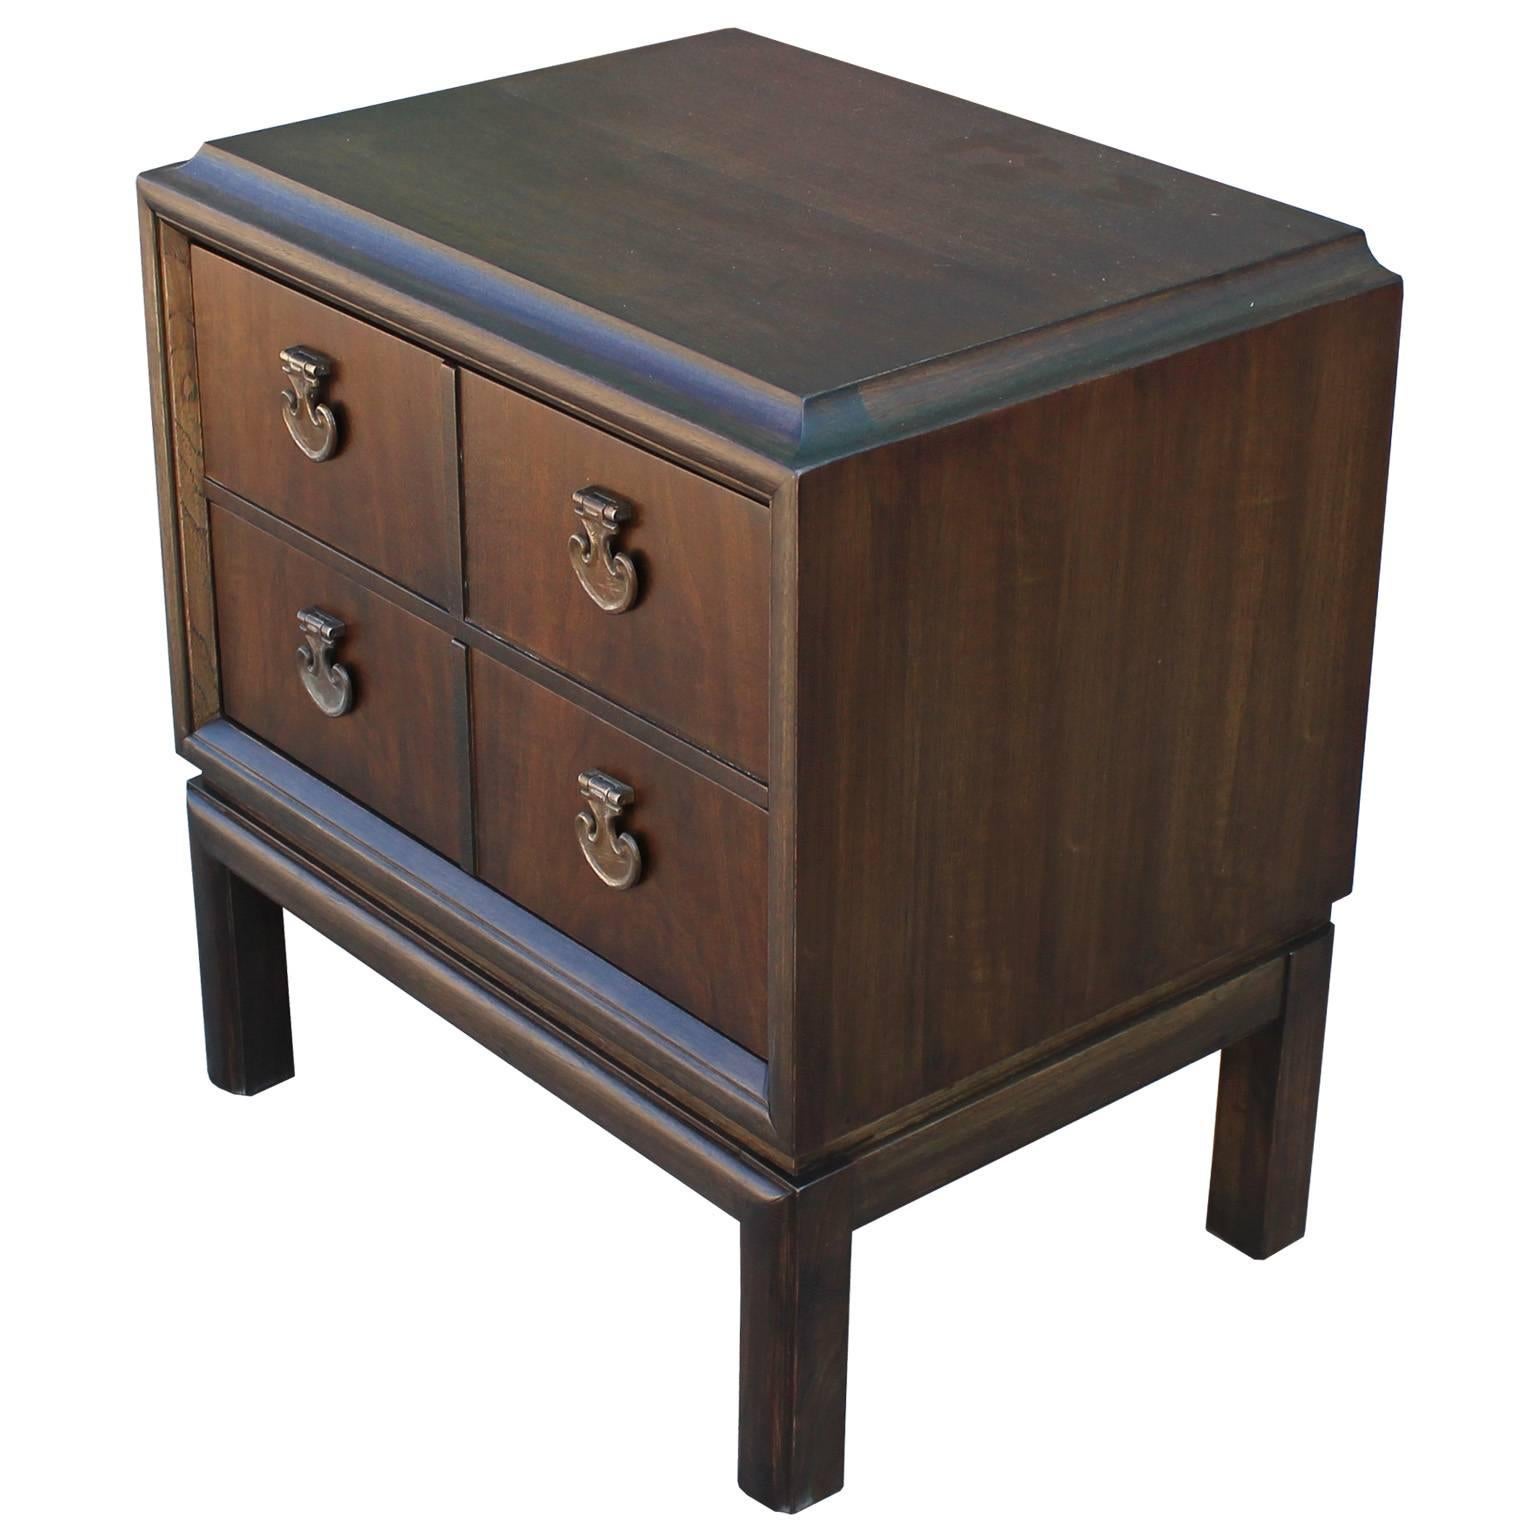 Luxe single nightstand or bedside table. Tables are finished in a dark walnut stain. Brass hardware has an excellent patina. Two drawers provide storage. Perfect in a Hollywood Regency, transitional, or Mid-Century space.